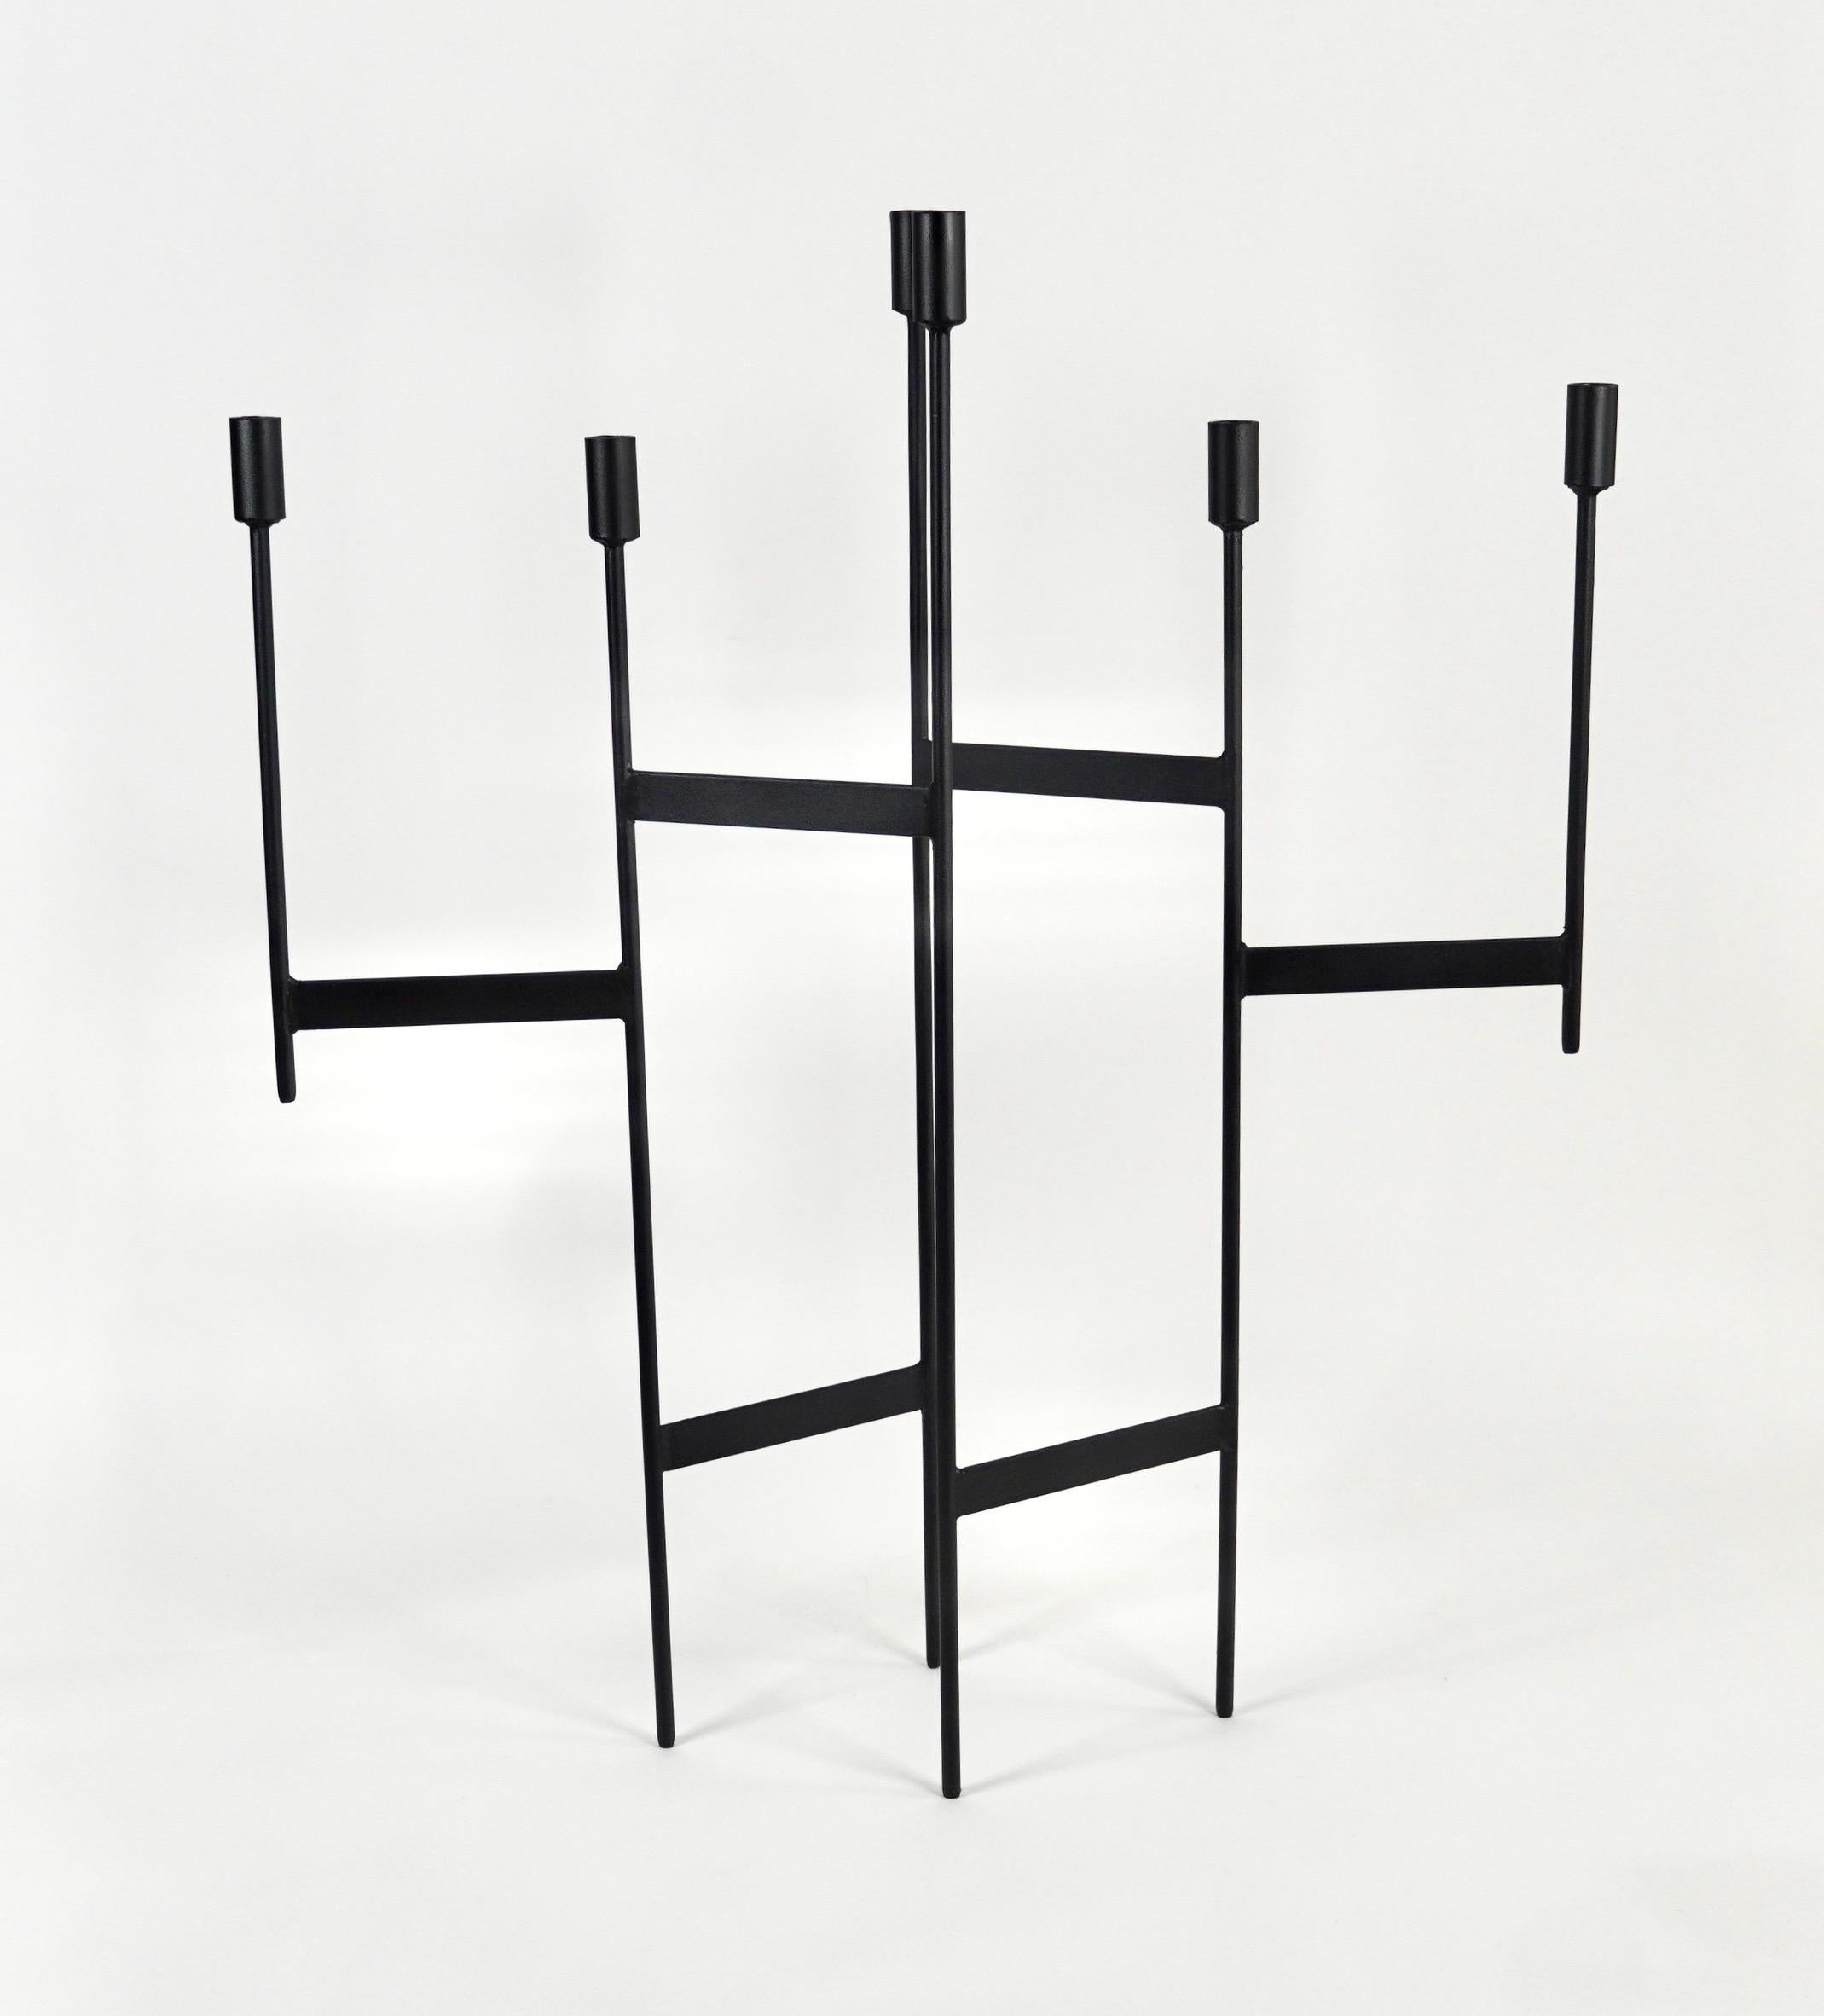 Early 1960s 6 candle candelabra designed by American designer Donald Drumm and sold by Raymor. Black enamel finish on a welded steel frame, the scale of the object can either be used as a stand alone on the floor or a statement piece on a large